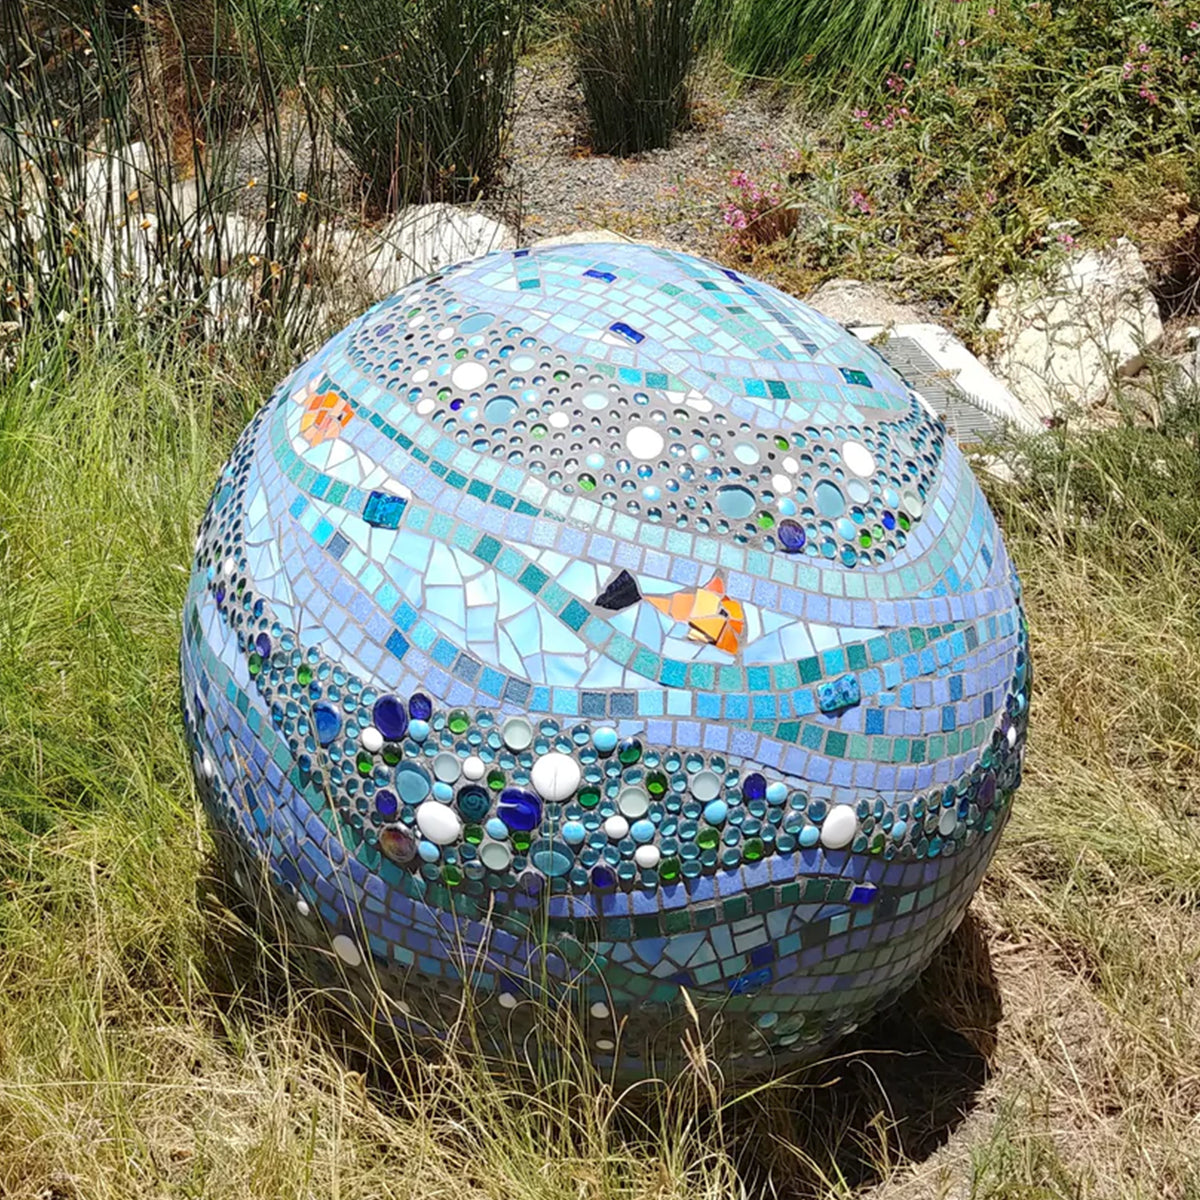 Mosaic Garden Sphere with aquatic motifs at Crest Apartments